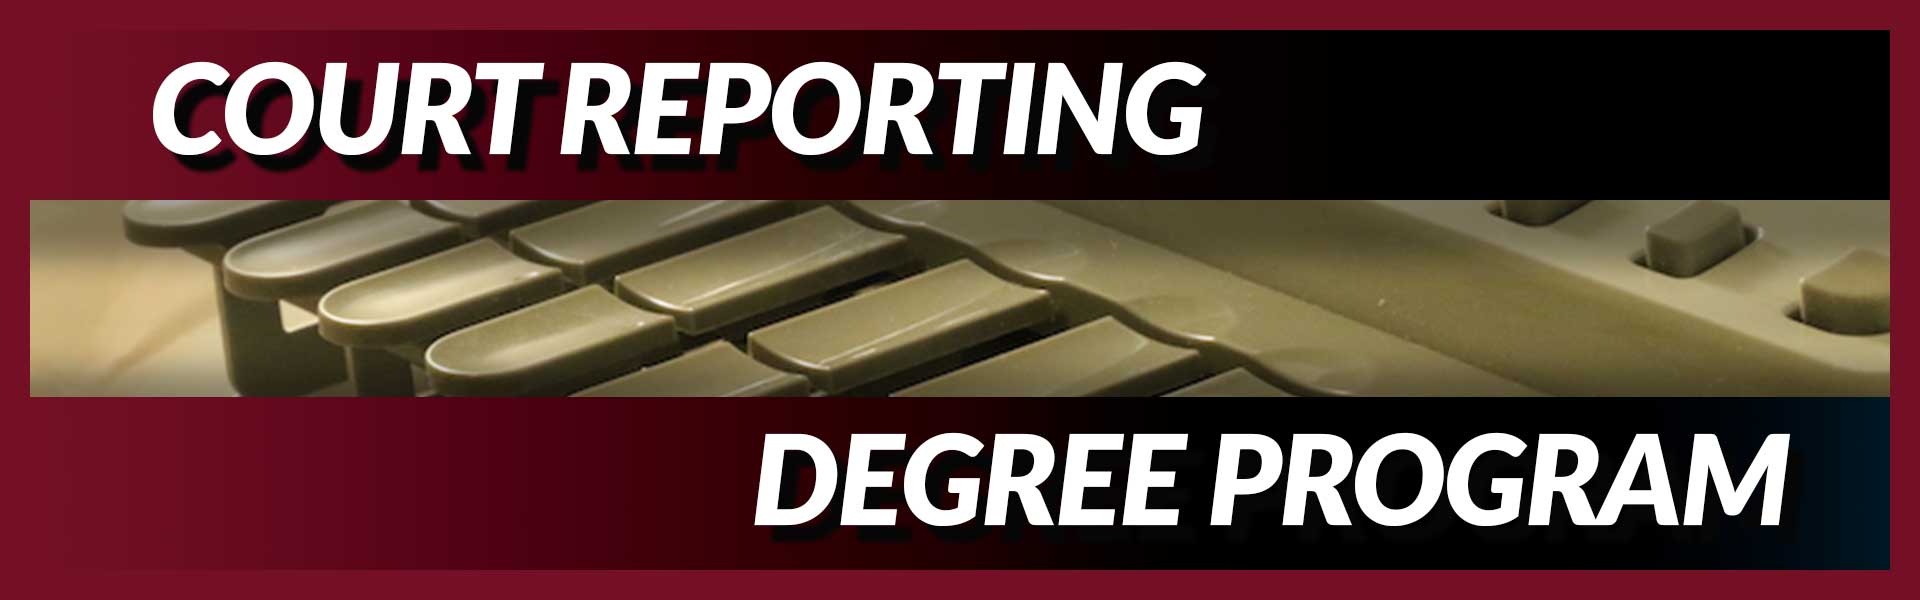 Court Reporting Degree Program at Five Towns College